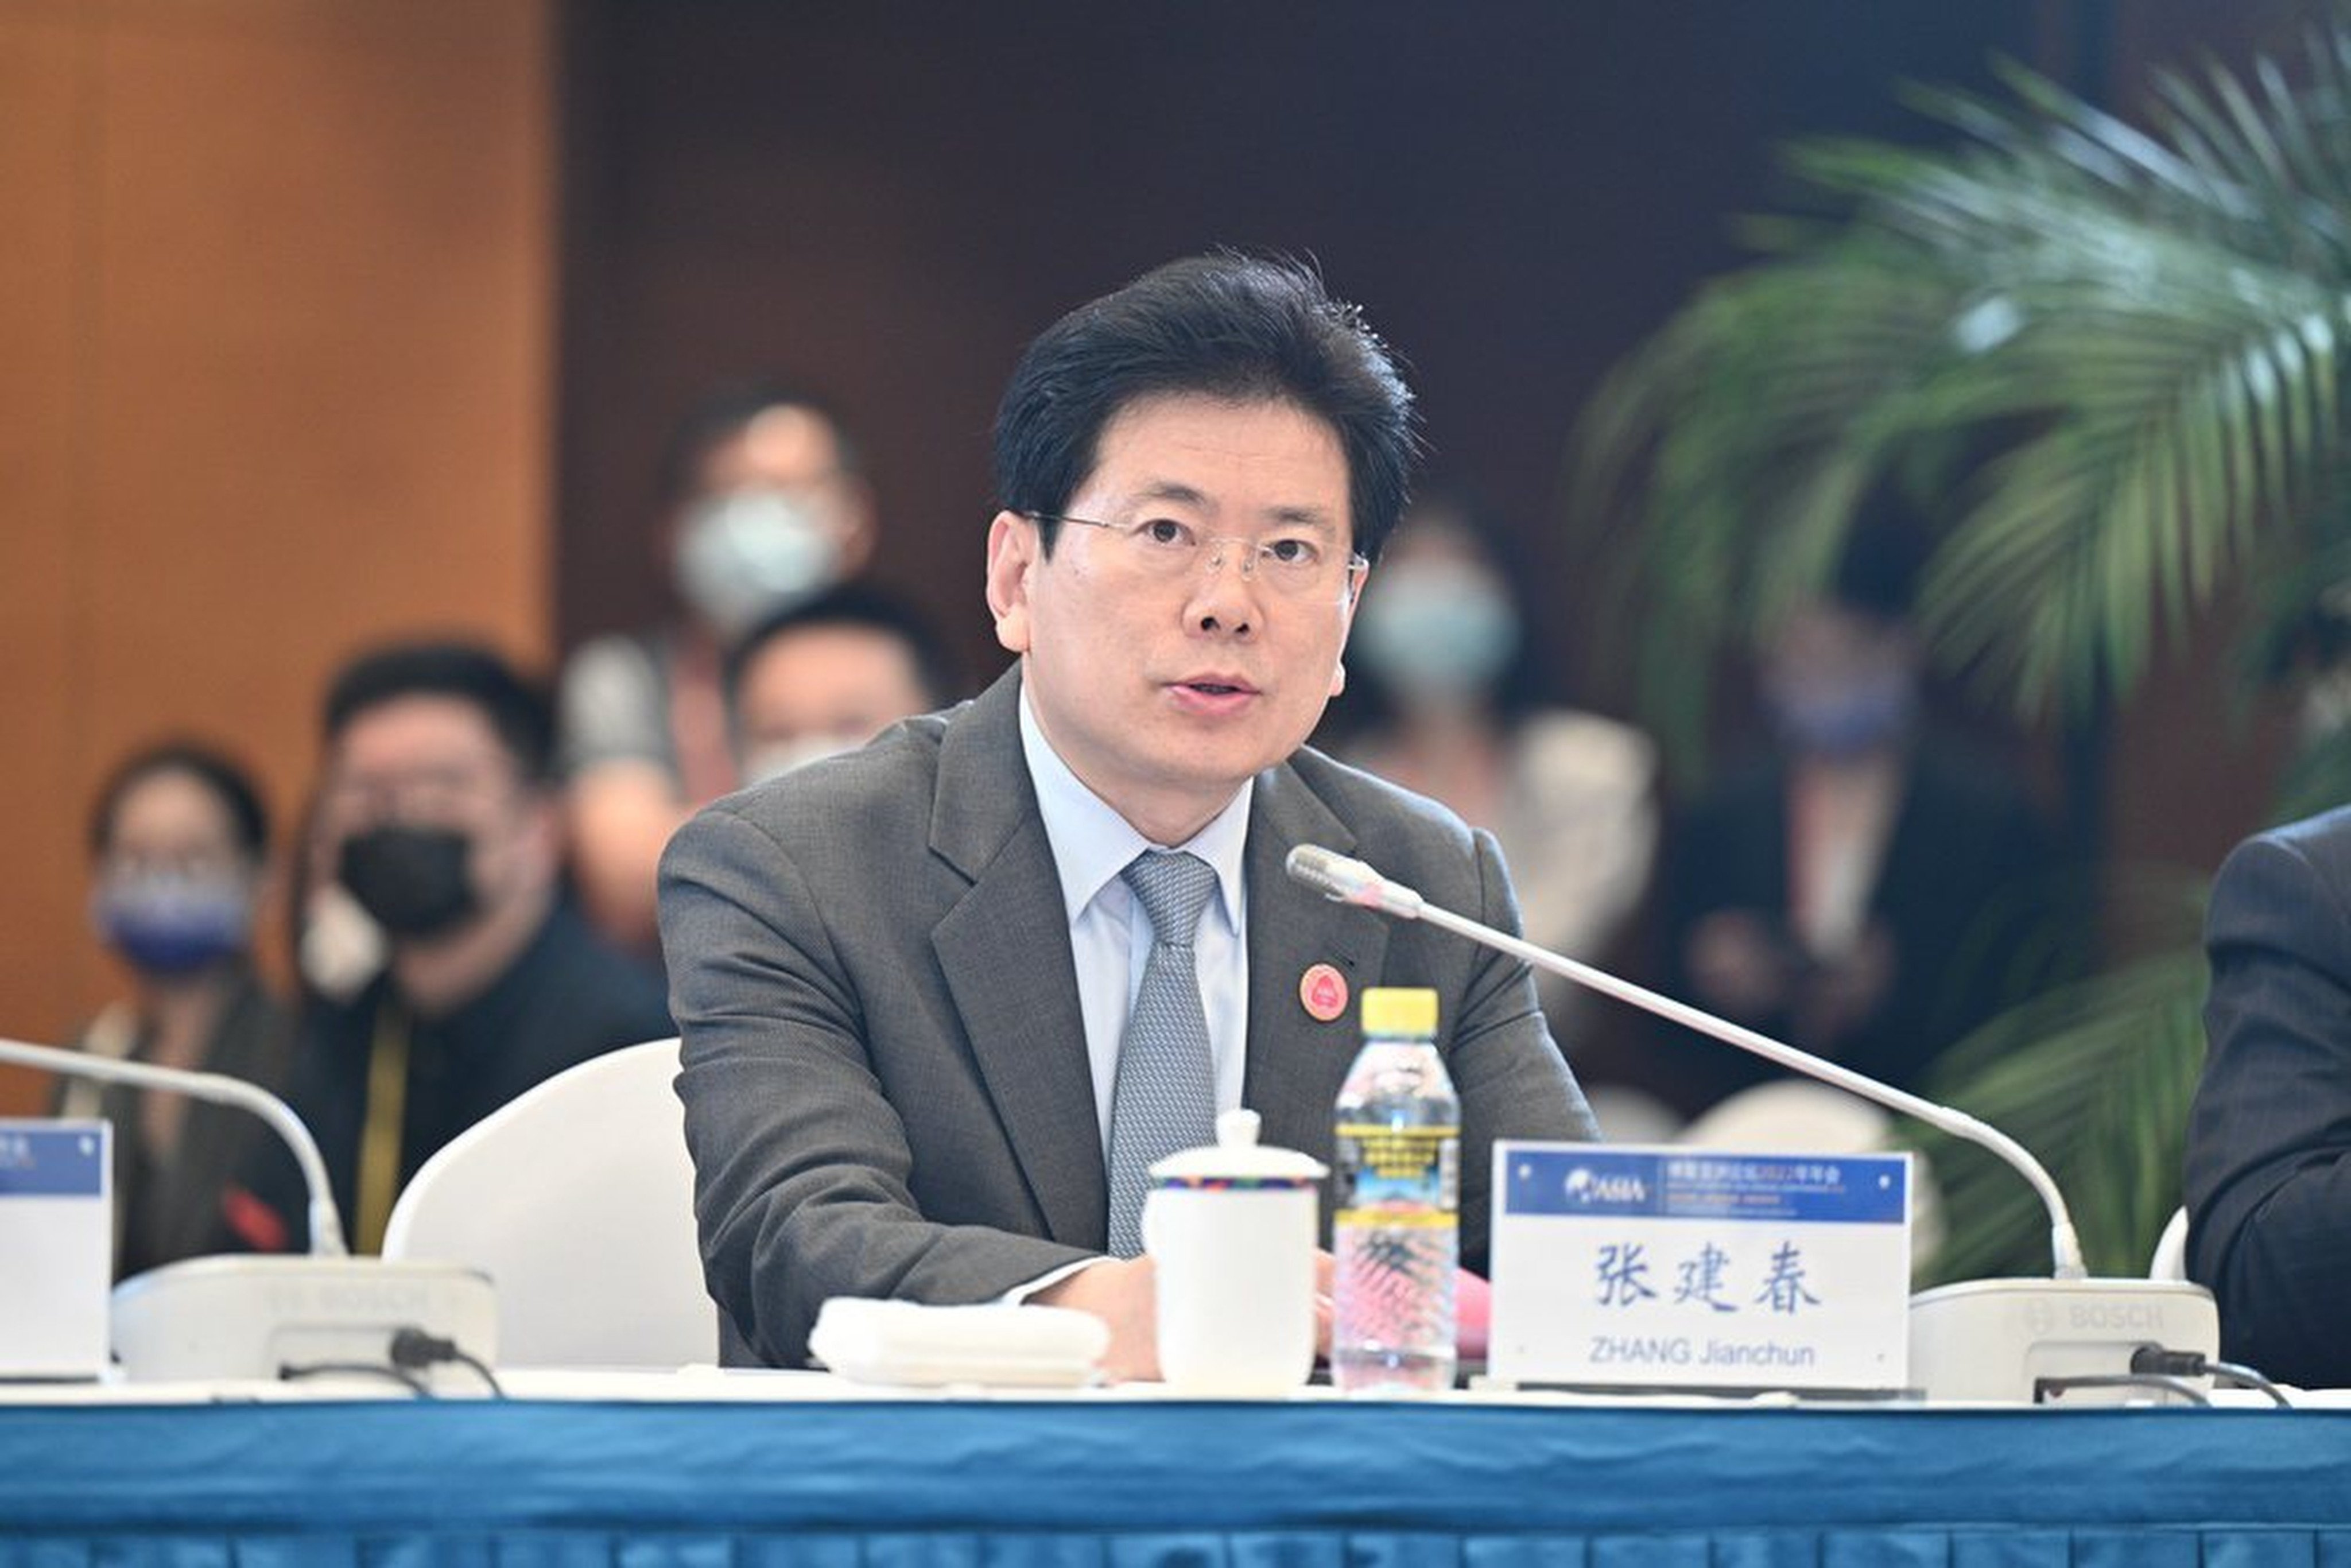 Zhang Jianchun, a deputy head of the Central Publicity Department, is under investigation for “suspected serious disciplinary and legal violations”. Photo:  National Copyright Administration